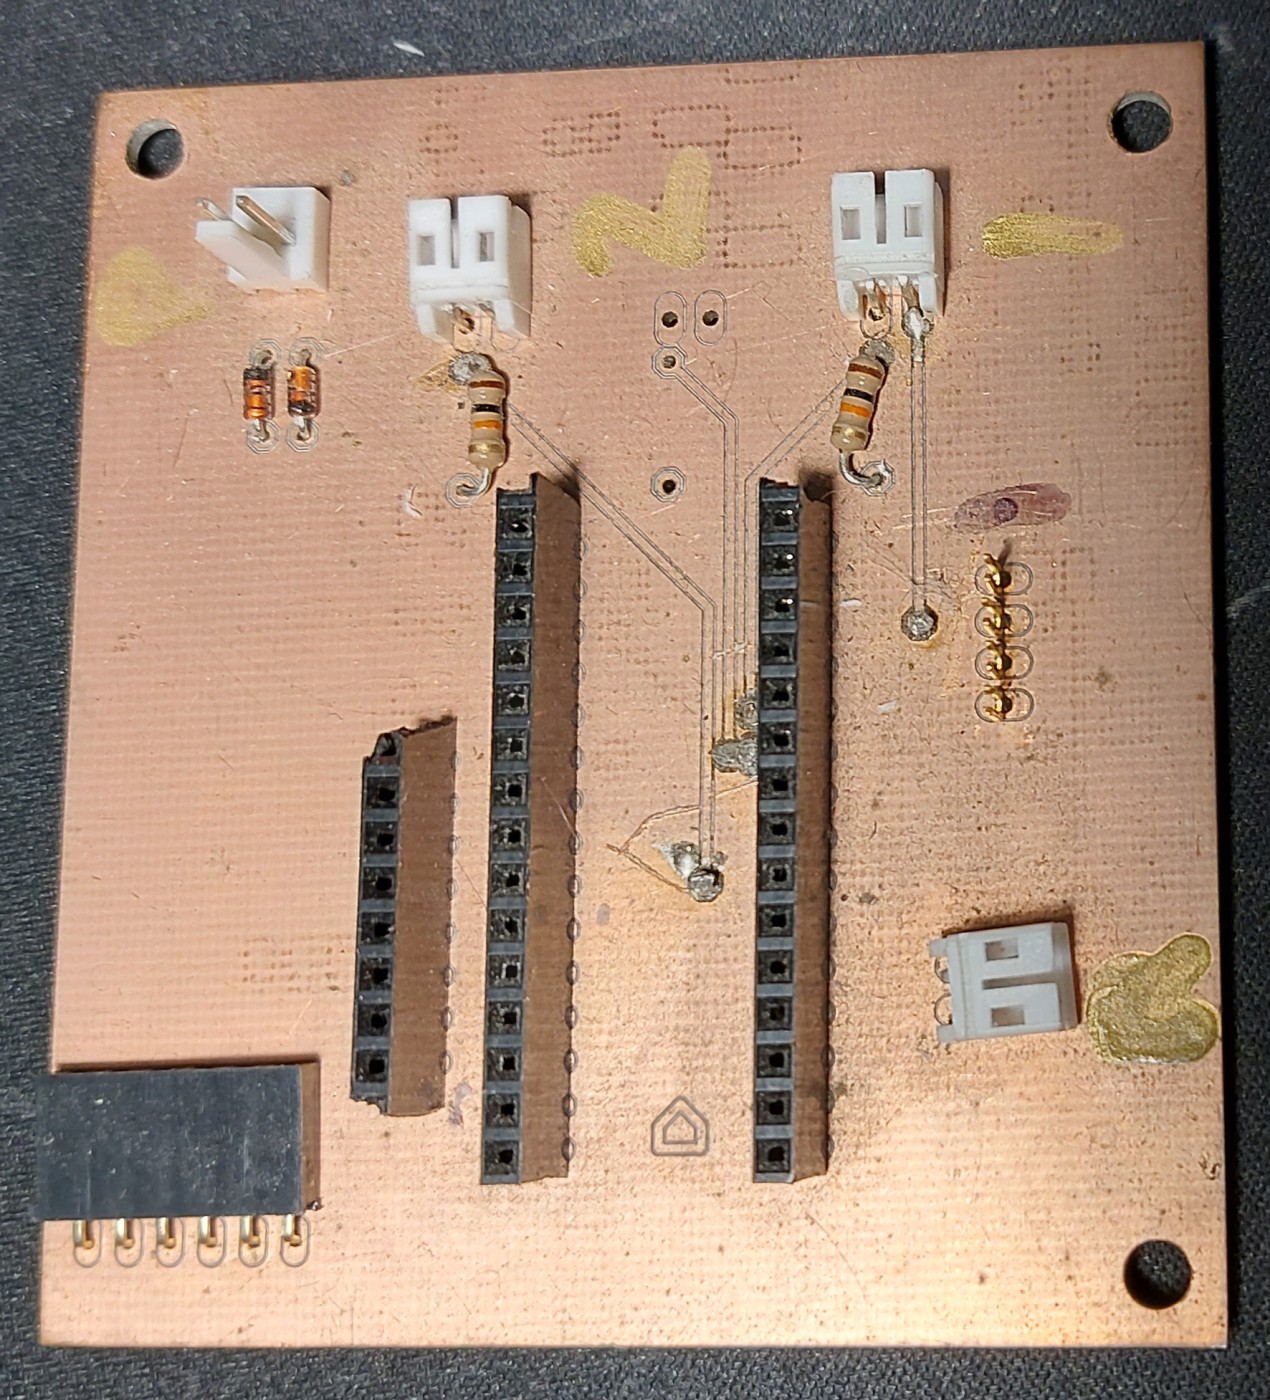 The first version of the oven control board from the top